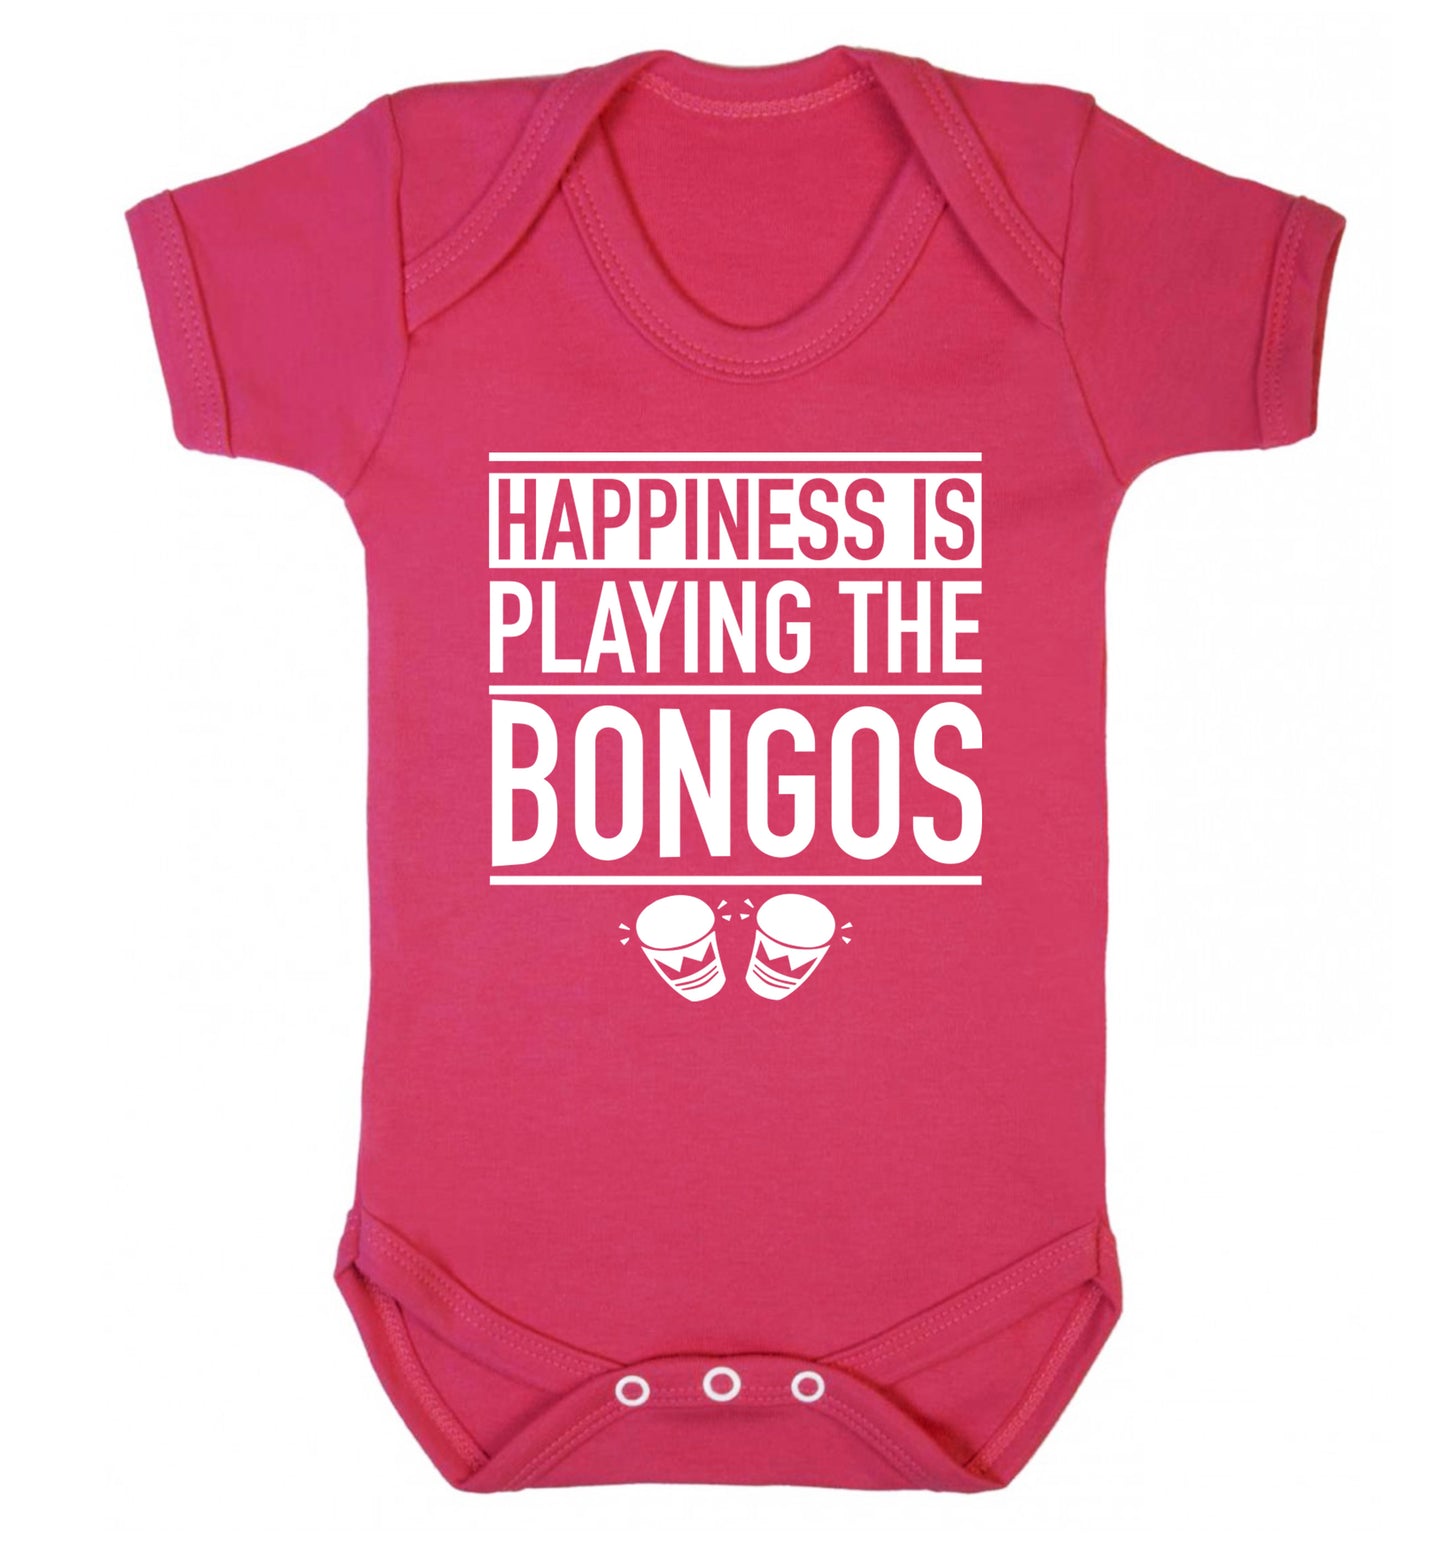 Happiness is playing the bongos Baby Vest dark pink 18-24 months